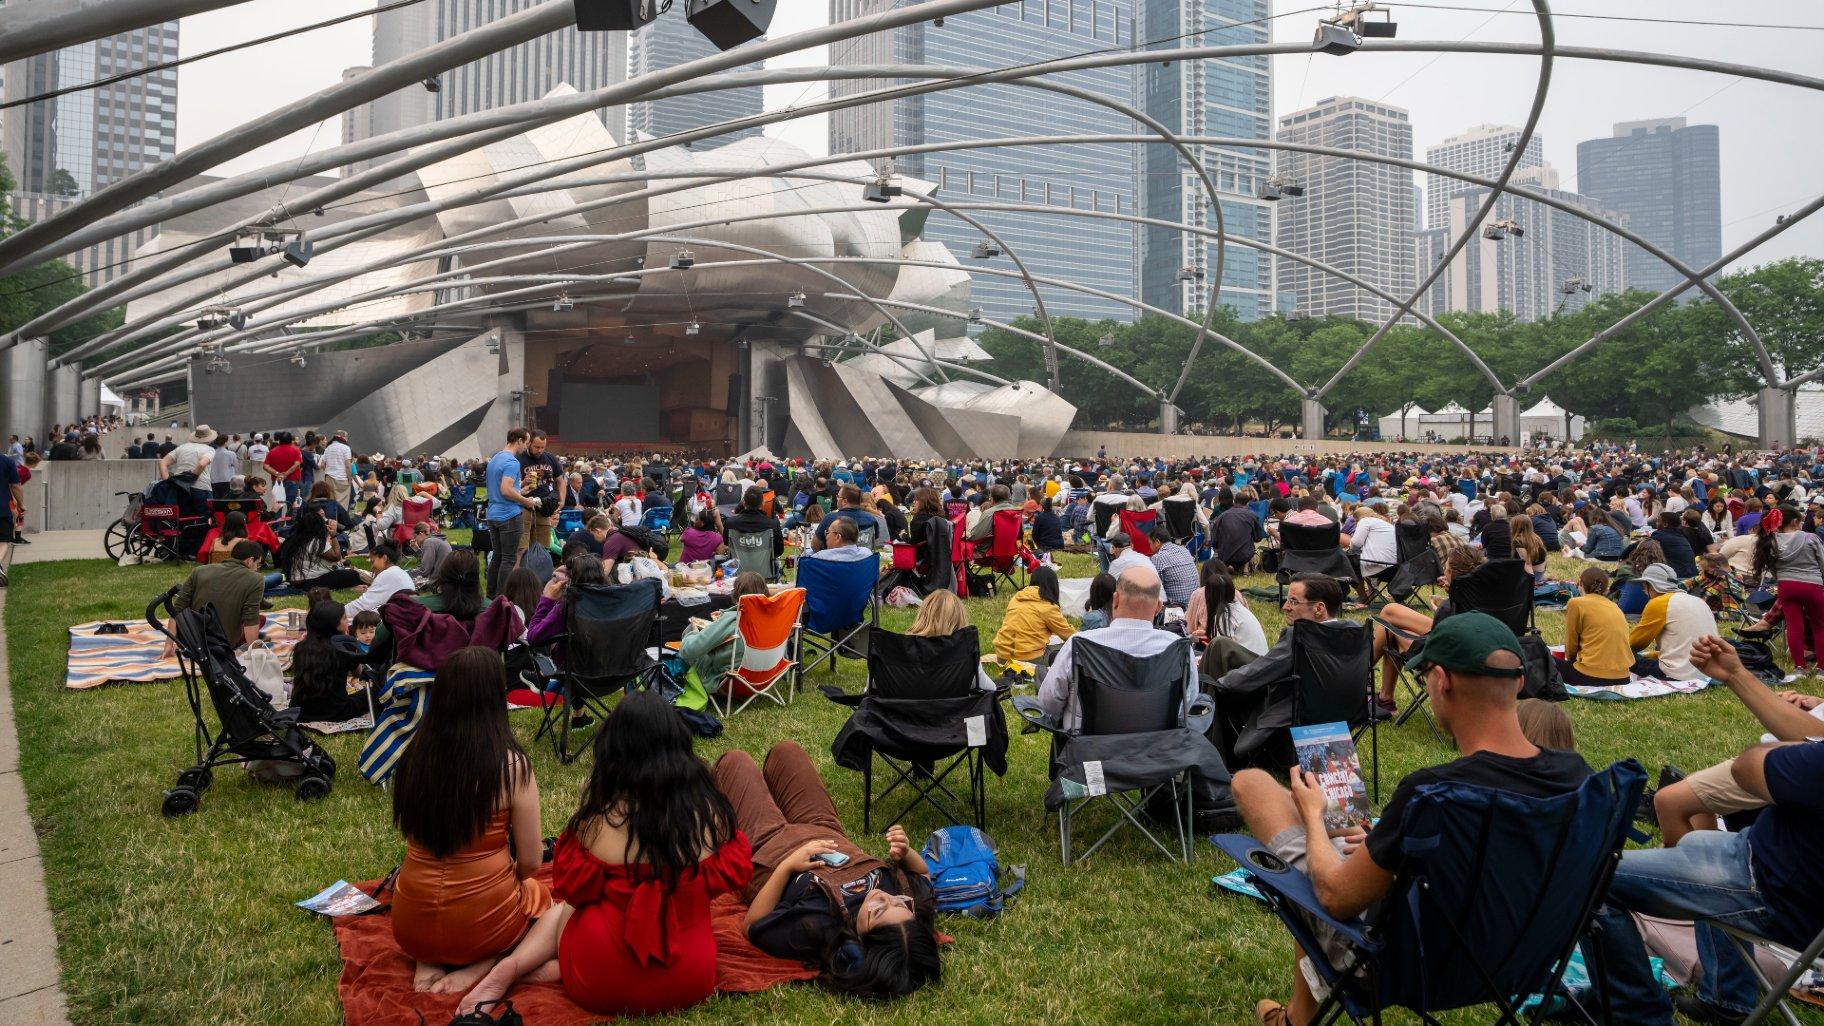 Audience members gather for the CSO Concert for Chicago in Millennium Park. (Todd Rosenberg)